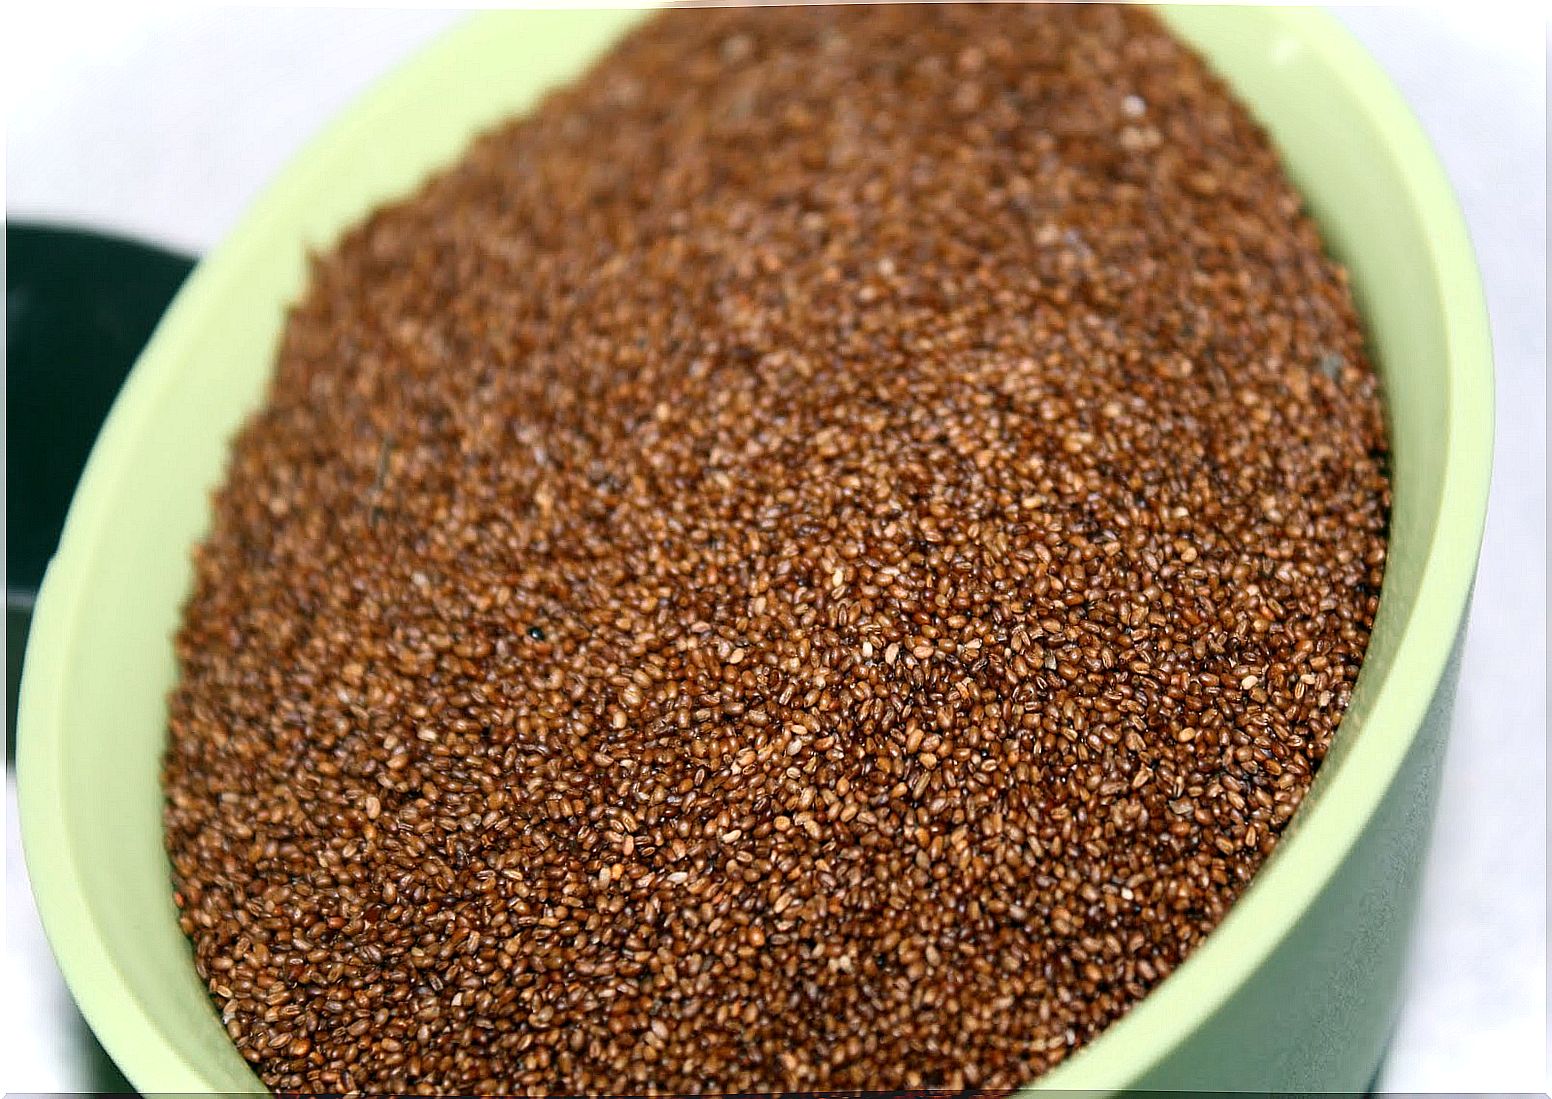 Teff gives you a feeling of fullness which is useful when you want to eat cereals for weight loss.